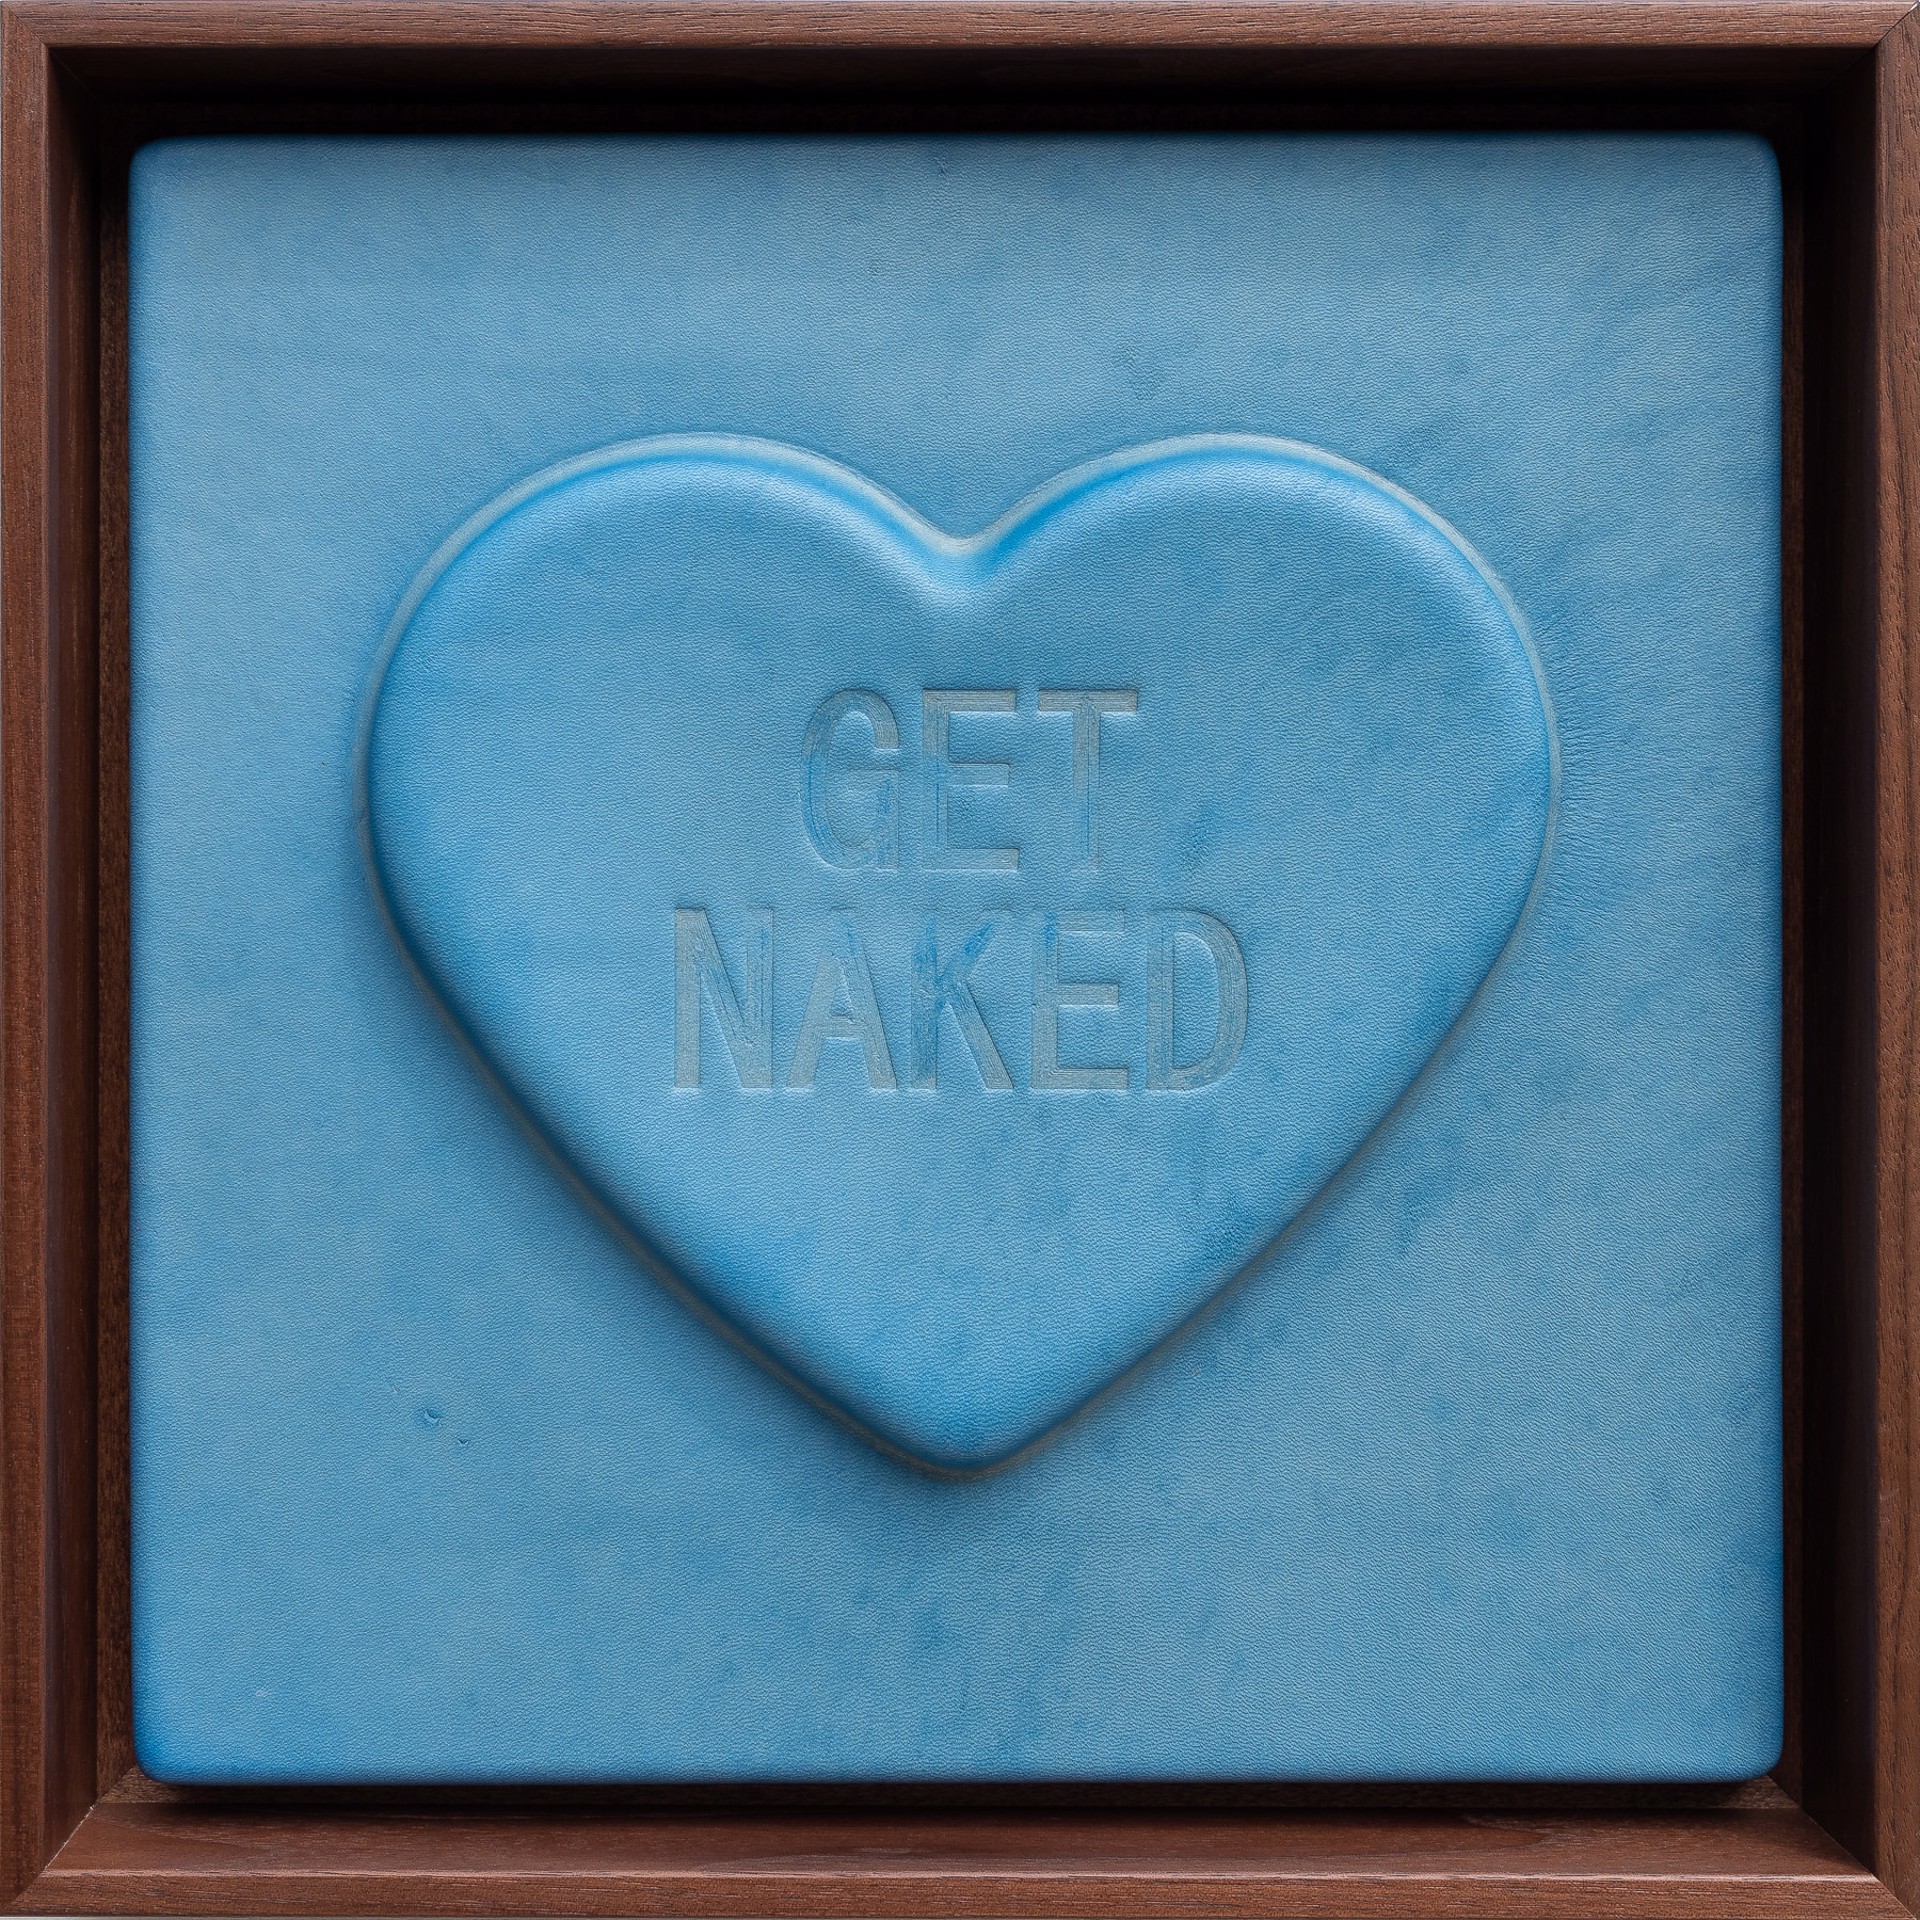 'GET NAKED' - Sweetheart series by Mx. Hyde